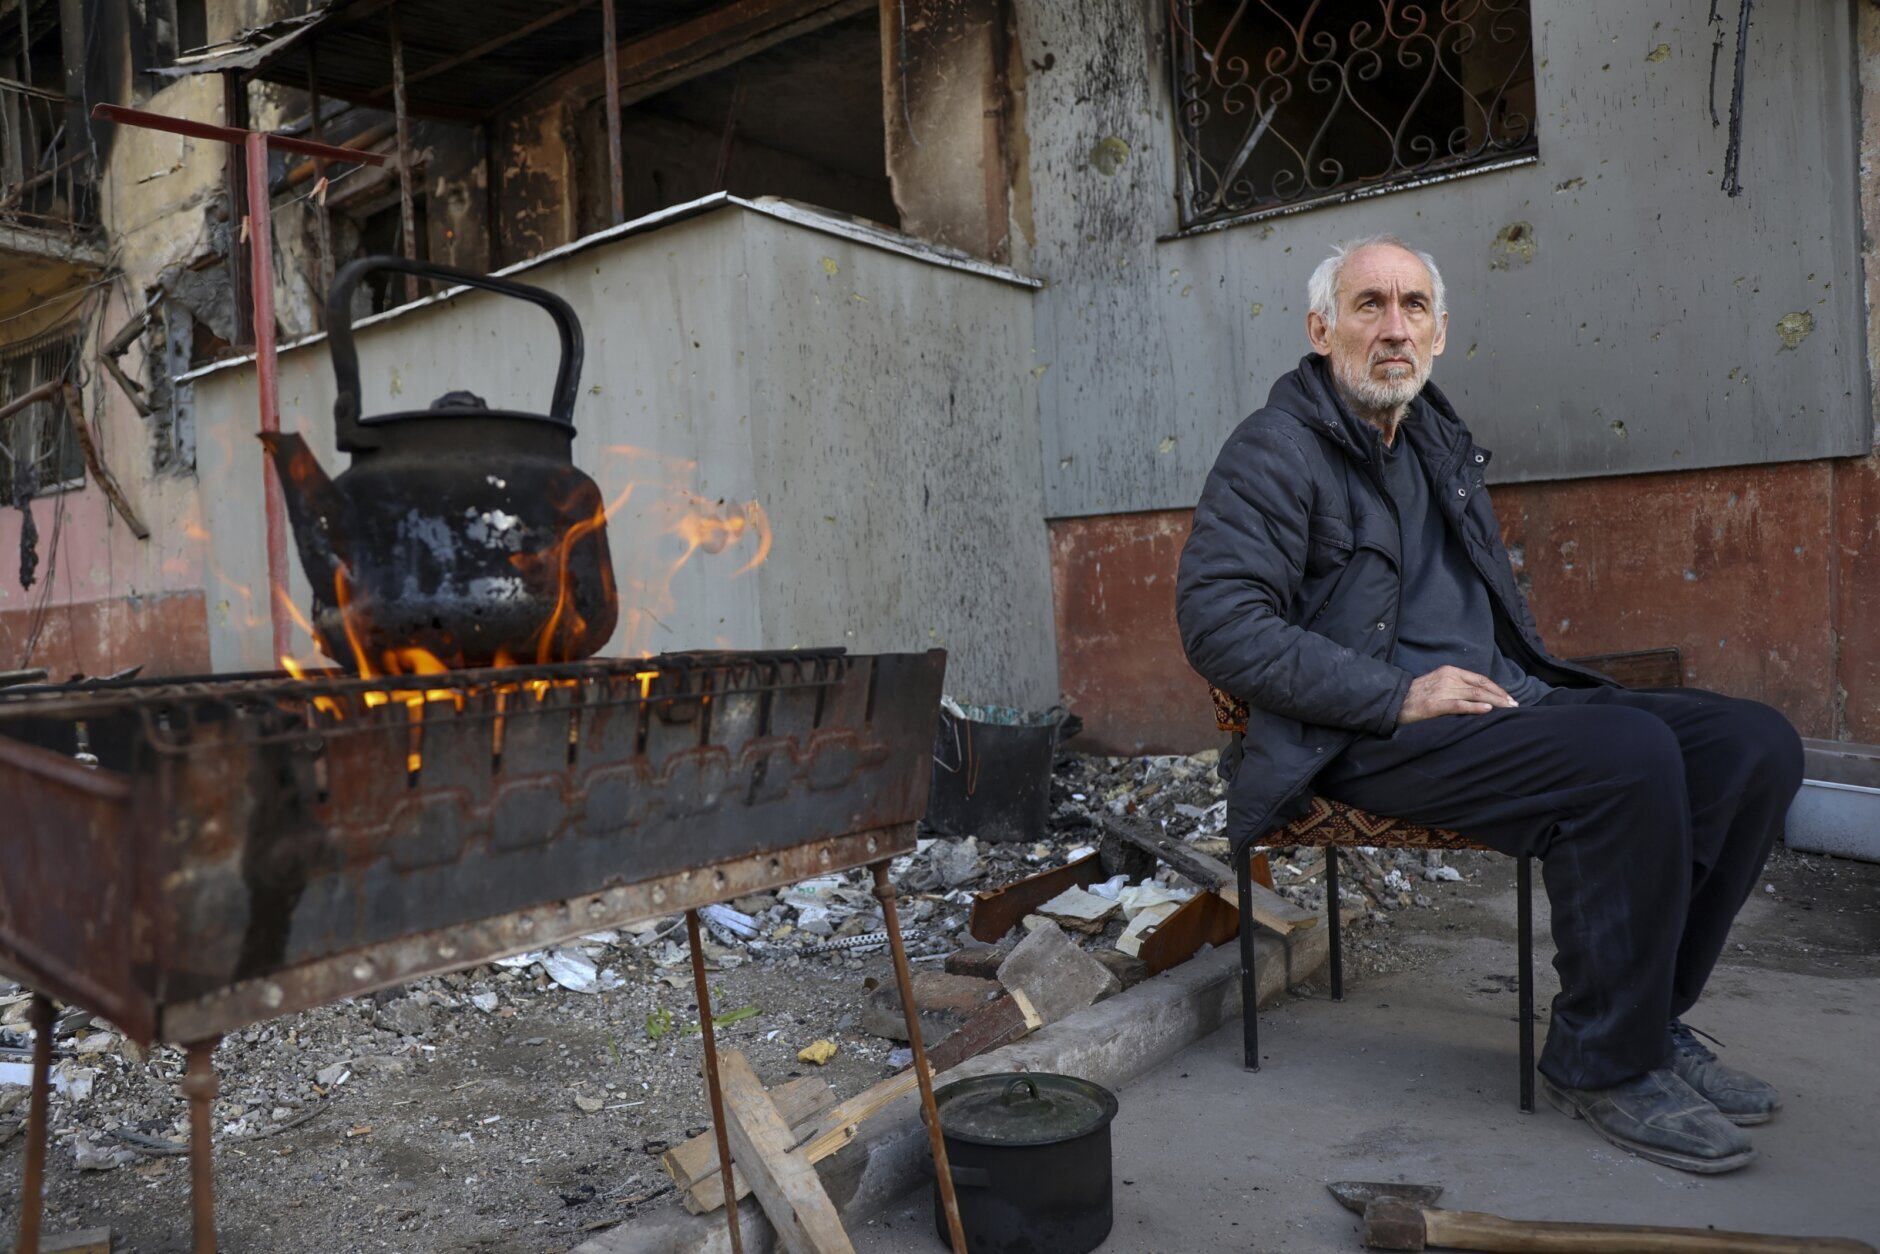 A local man sits in front of an apartment building damaged from heavy fighting as he waits for the kettle to boil in an area controlled by Russian-backed separatist forces in Mariupol, Ukraine, Tuesday, April 26, 2022. (AP Photo/Alexei Alexandrov)